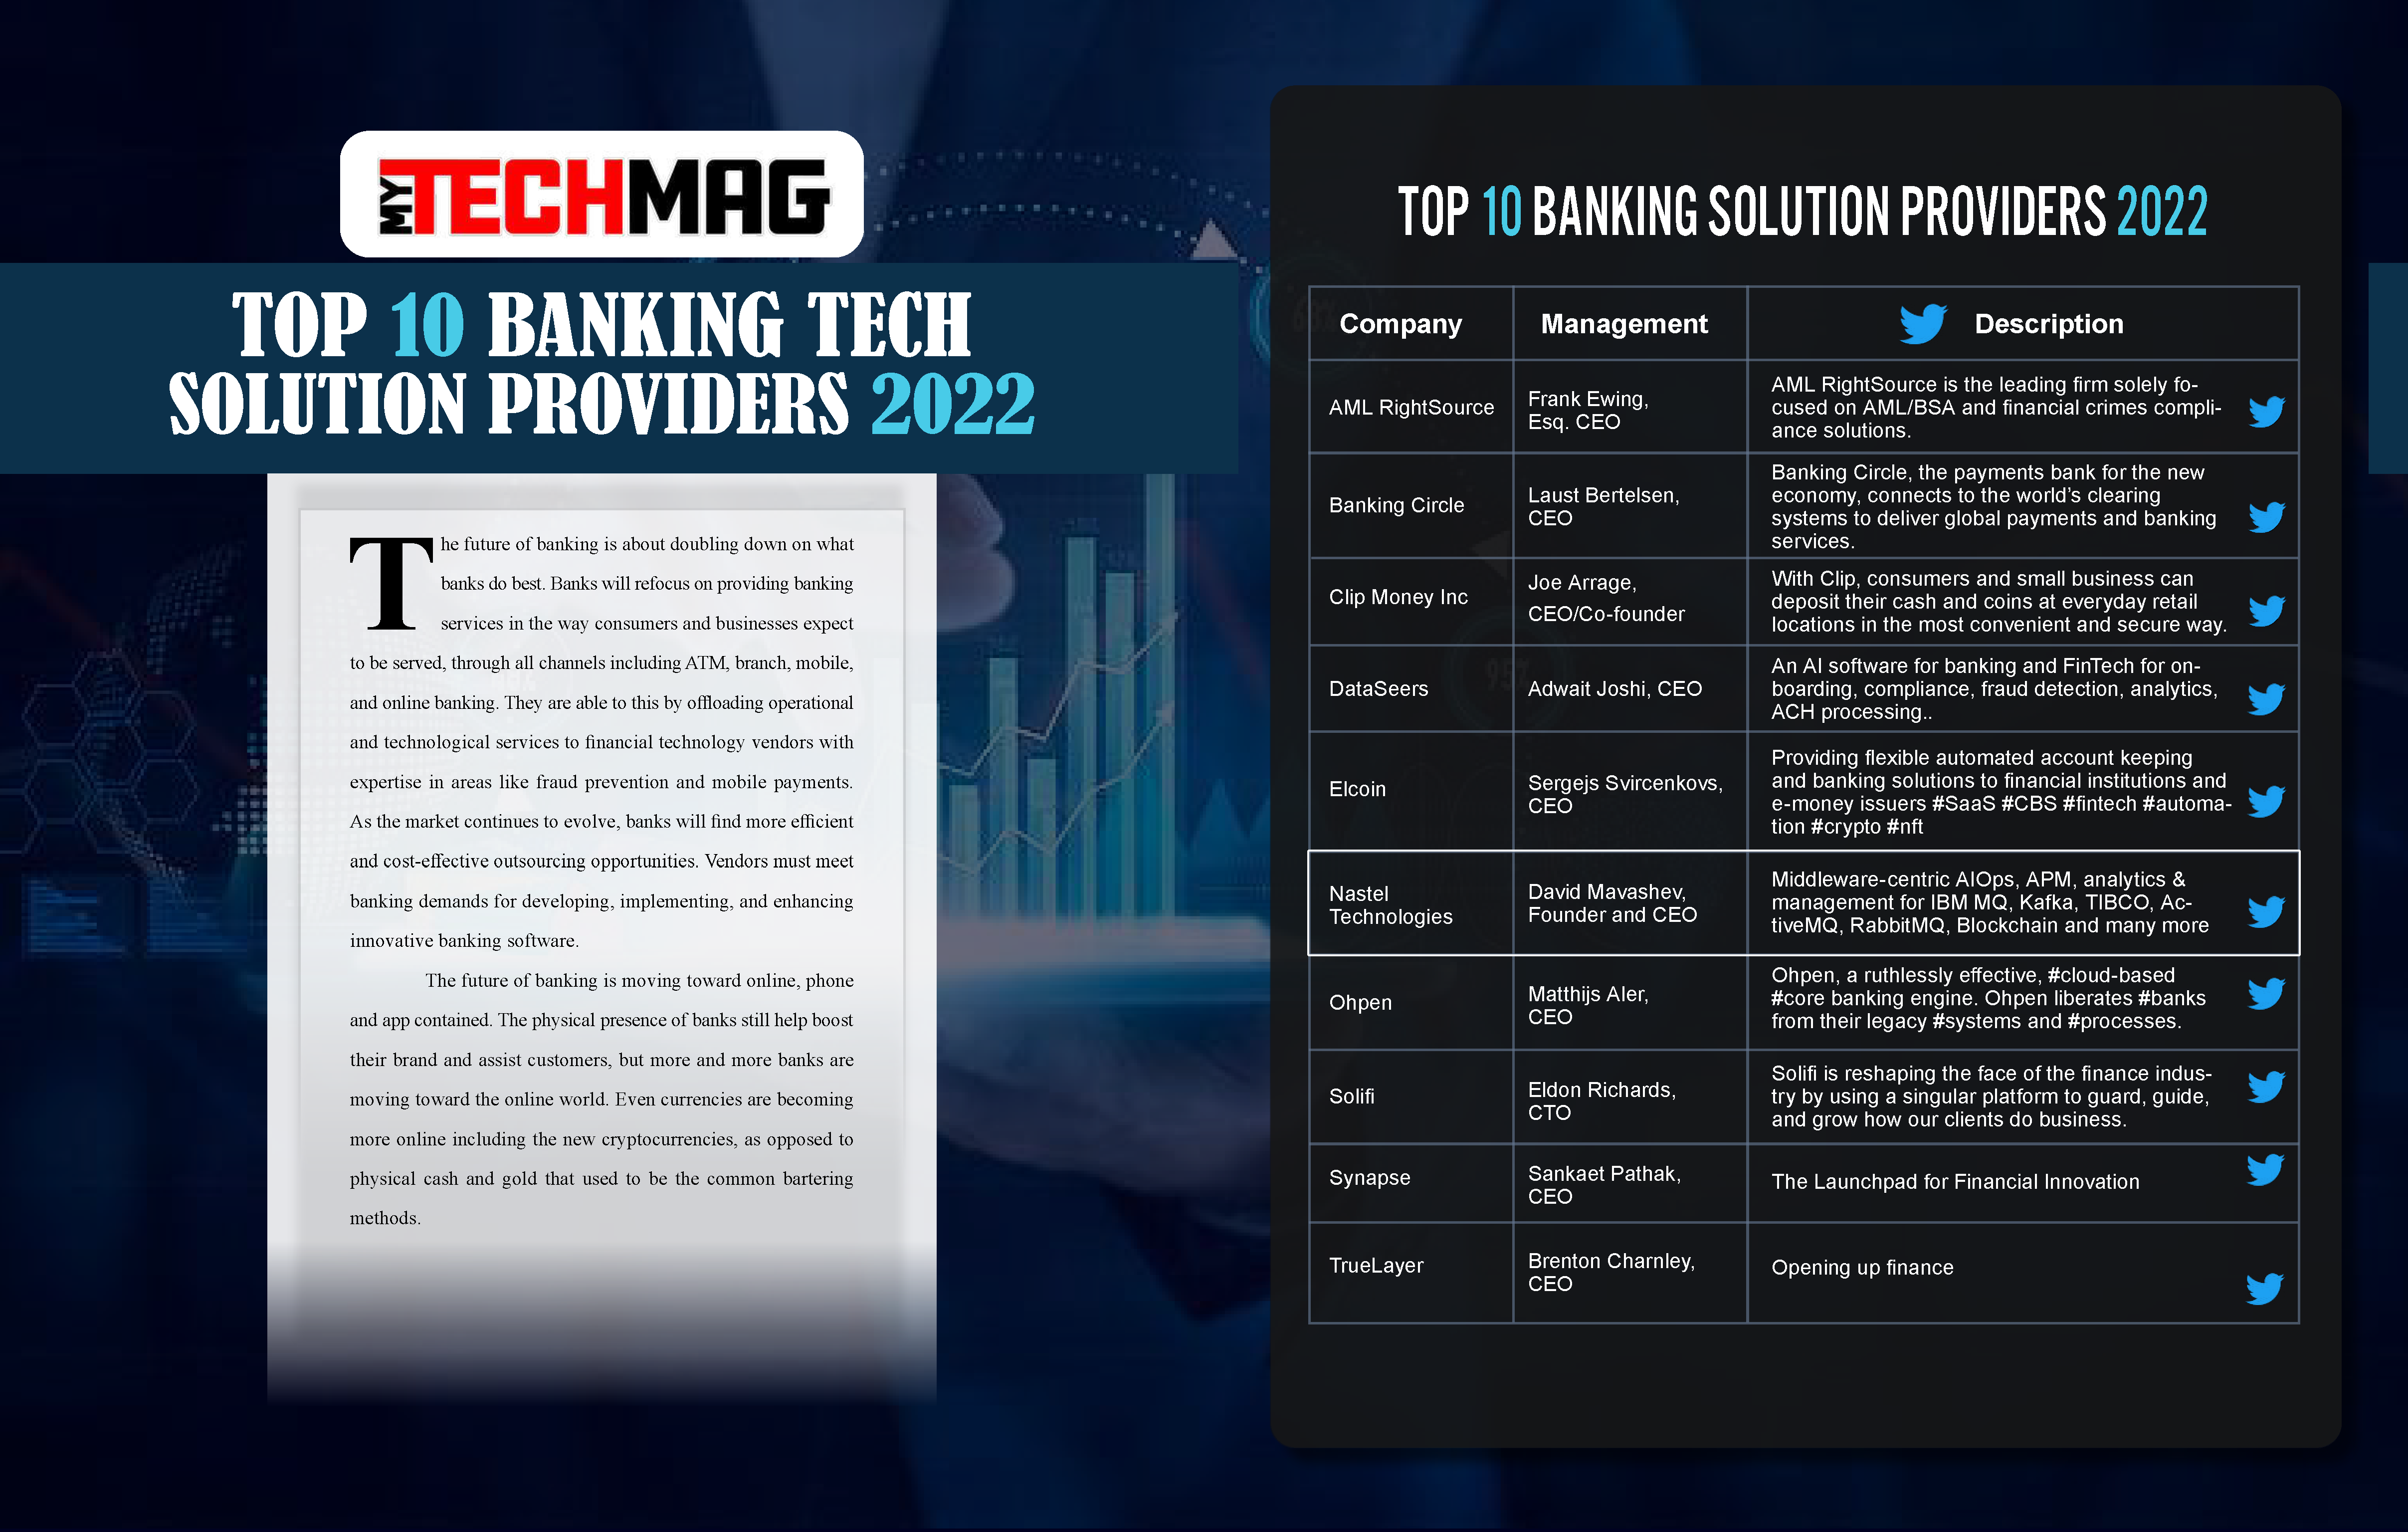 Top 10 Bank Tech Solution Providers 2022